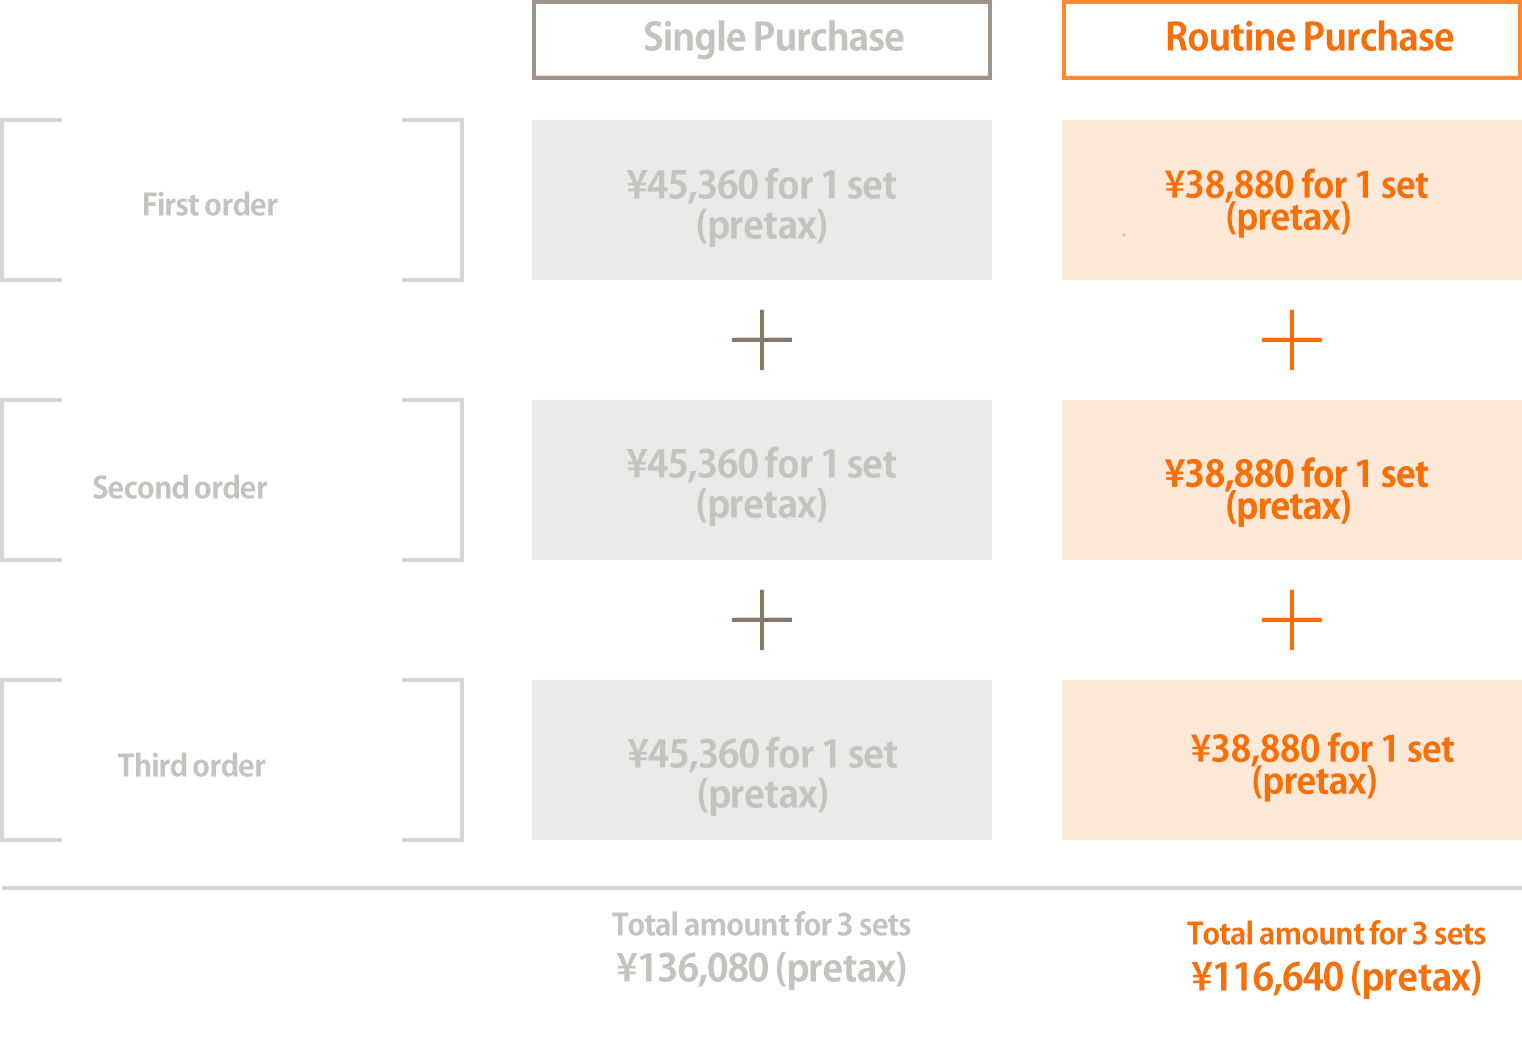 Single Purchase	Routine Purchase	
  First order	\45,360 for 1 set	\38,880 for 1 set
		(pretax)			(pretax)
